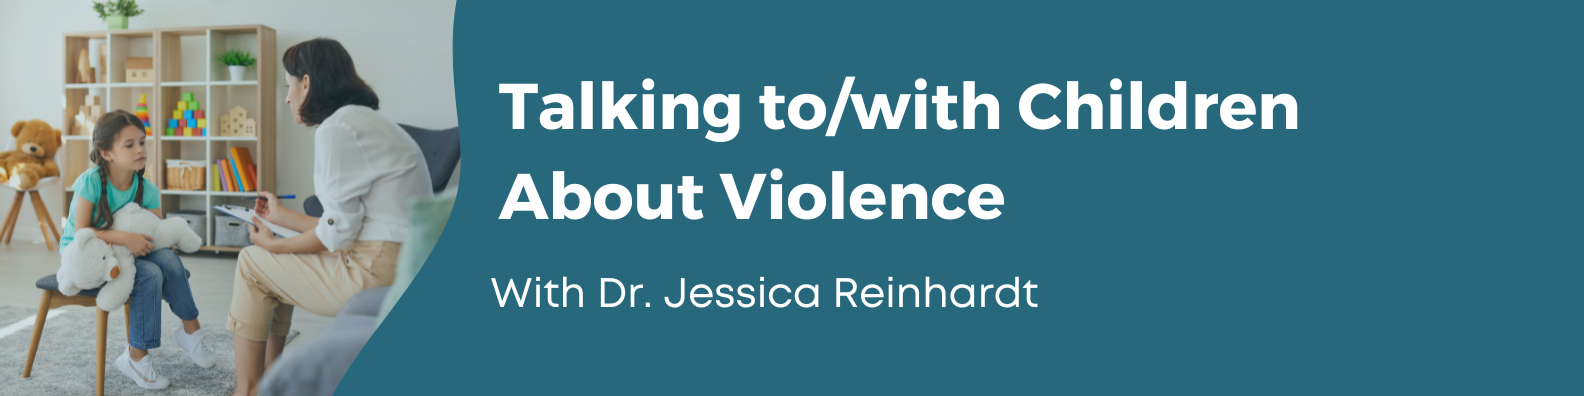 Talking to/with Children About Violence, with Dr. Jessica Reinhardt